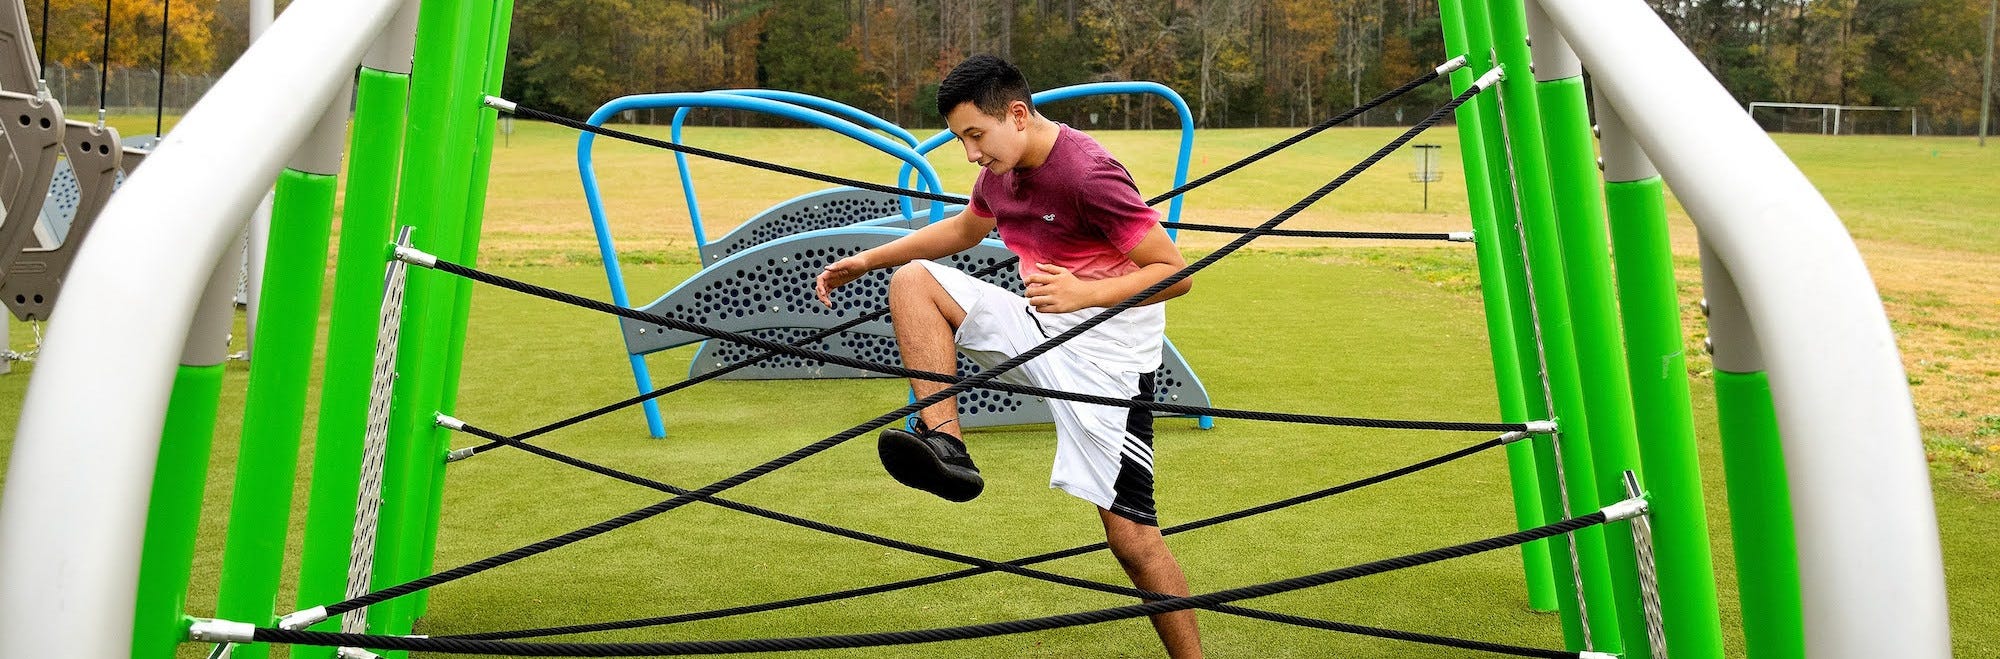 From the Backyard to the Schoolyard - Obstacle Courses Transform the Way Students Play